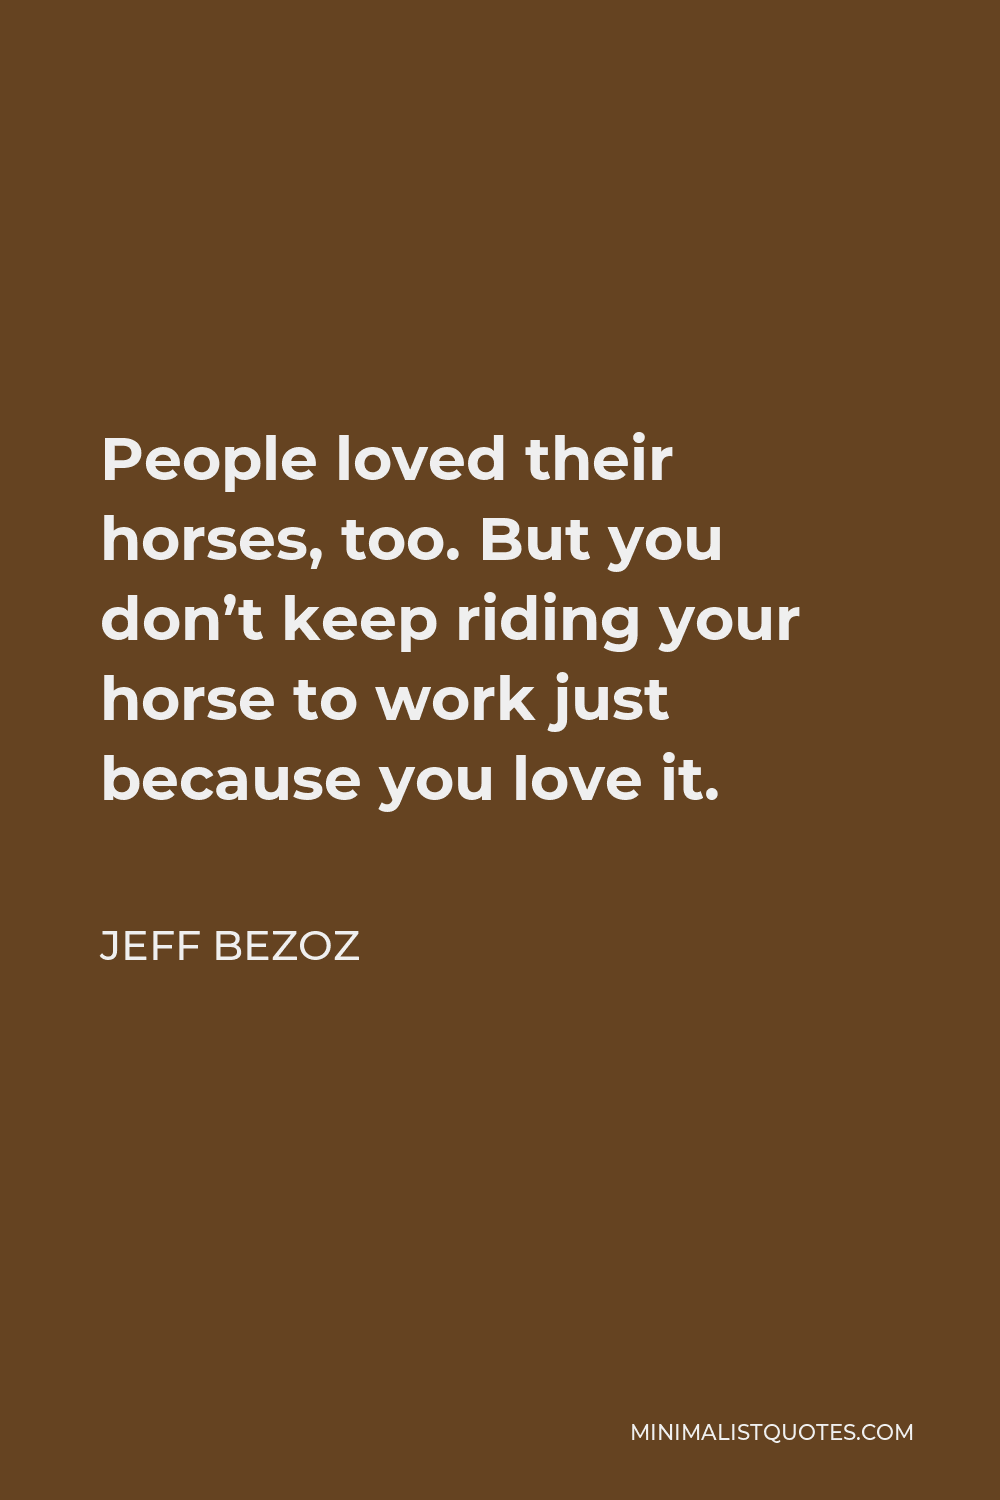 Jeff Bezoz Quote - People loved their horses, too. But you don’t keep riding your horse to work just because you love it.